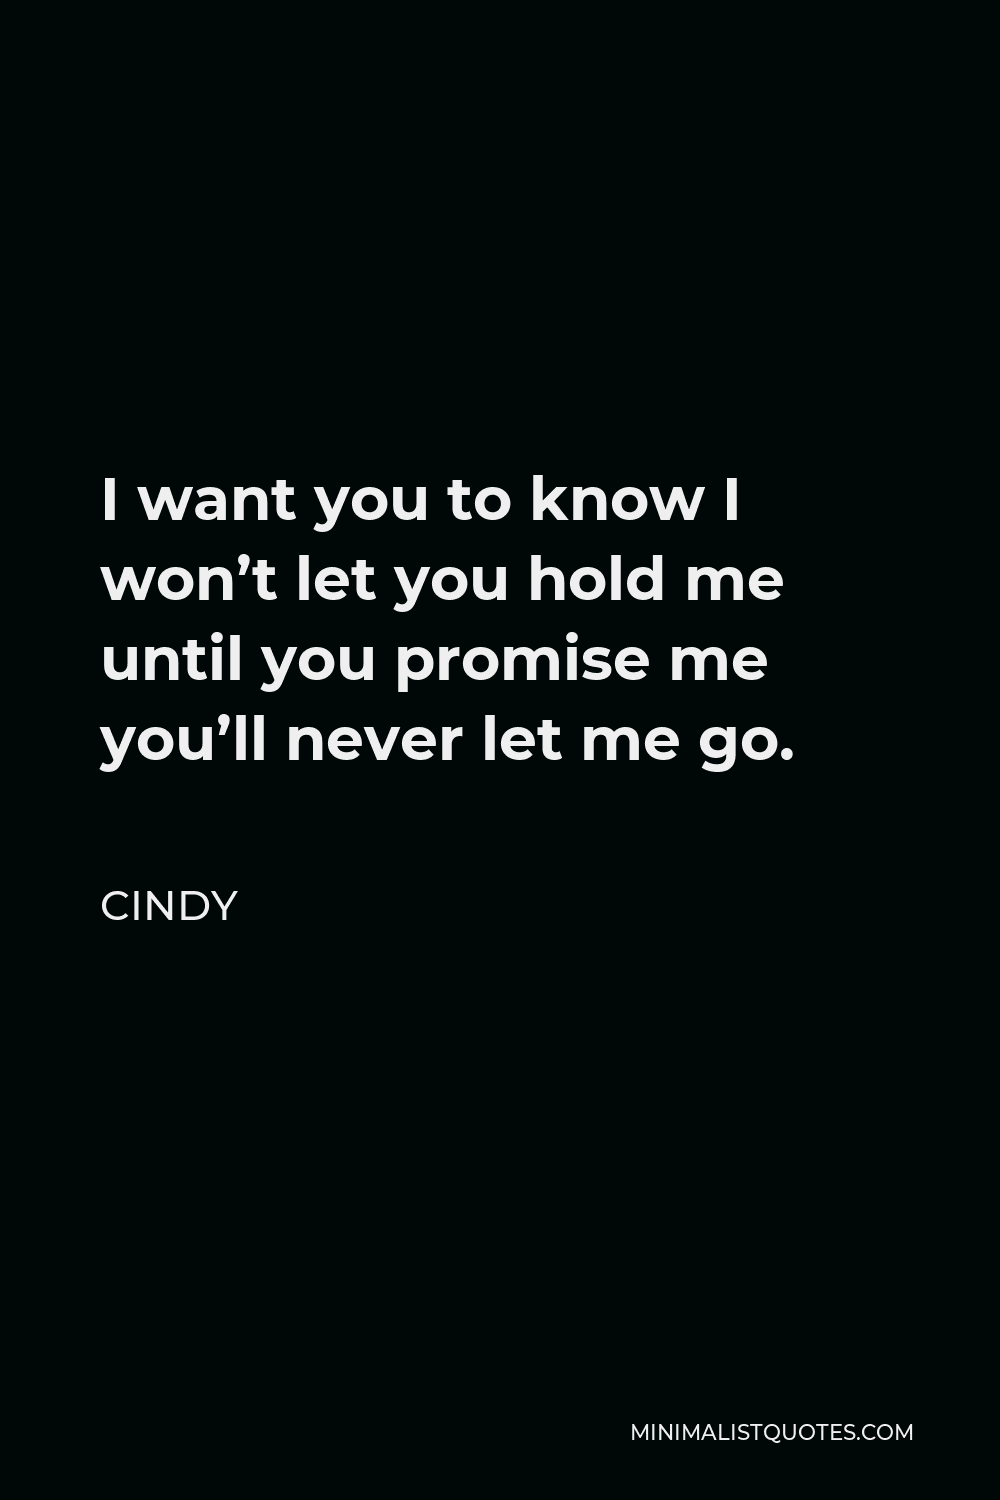 Cindy Quote - I want you to know I won’t let you hold me until you promise me you’ll never let me go.